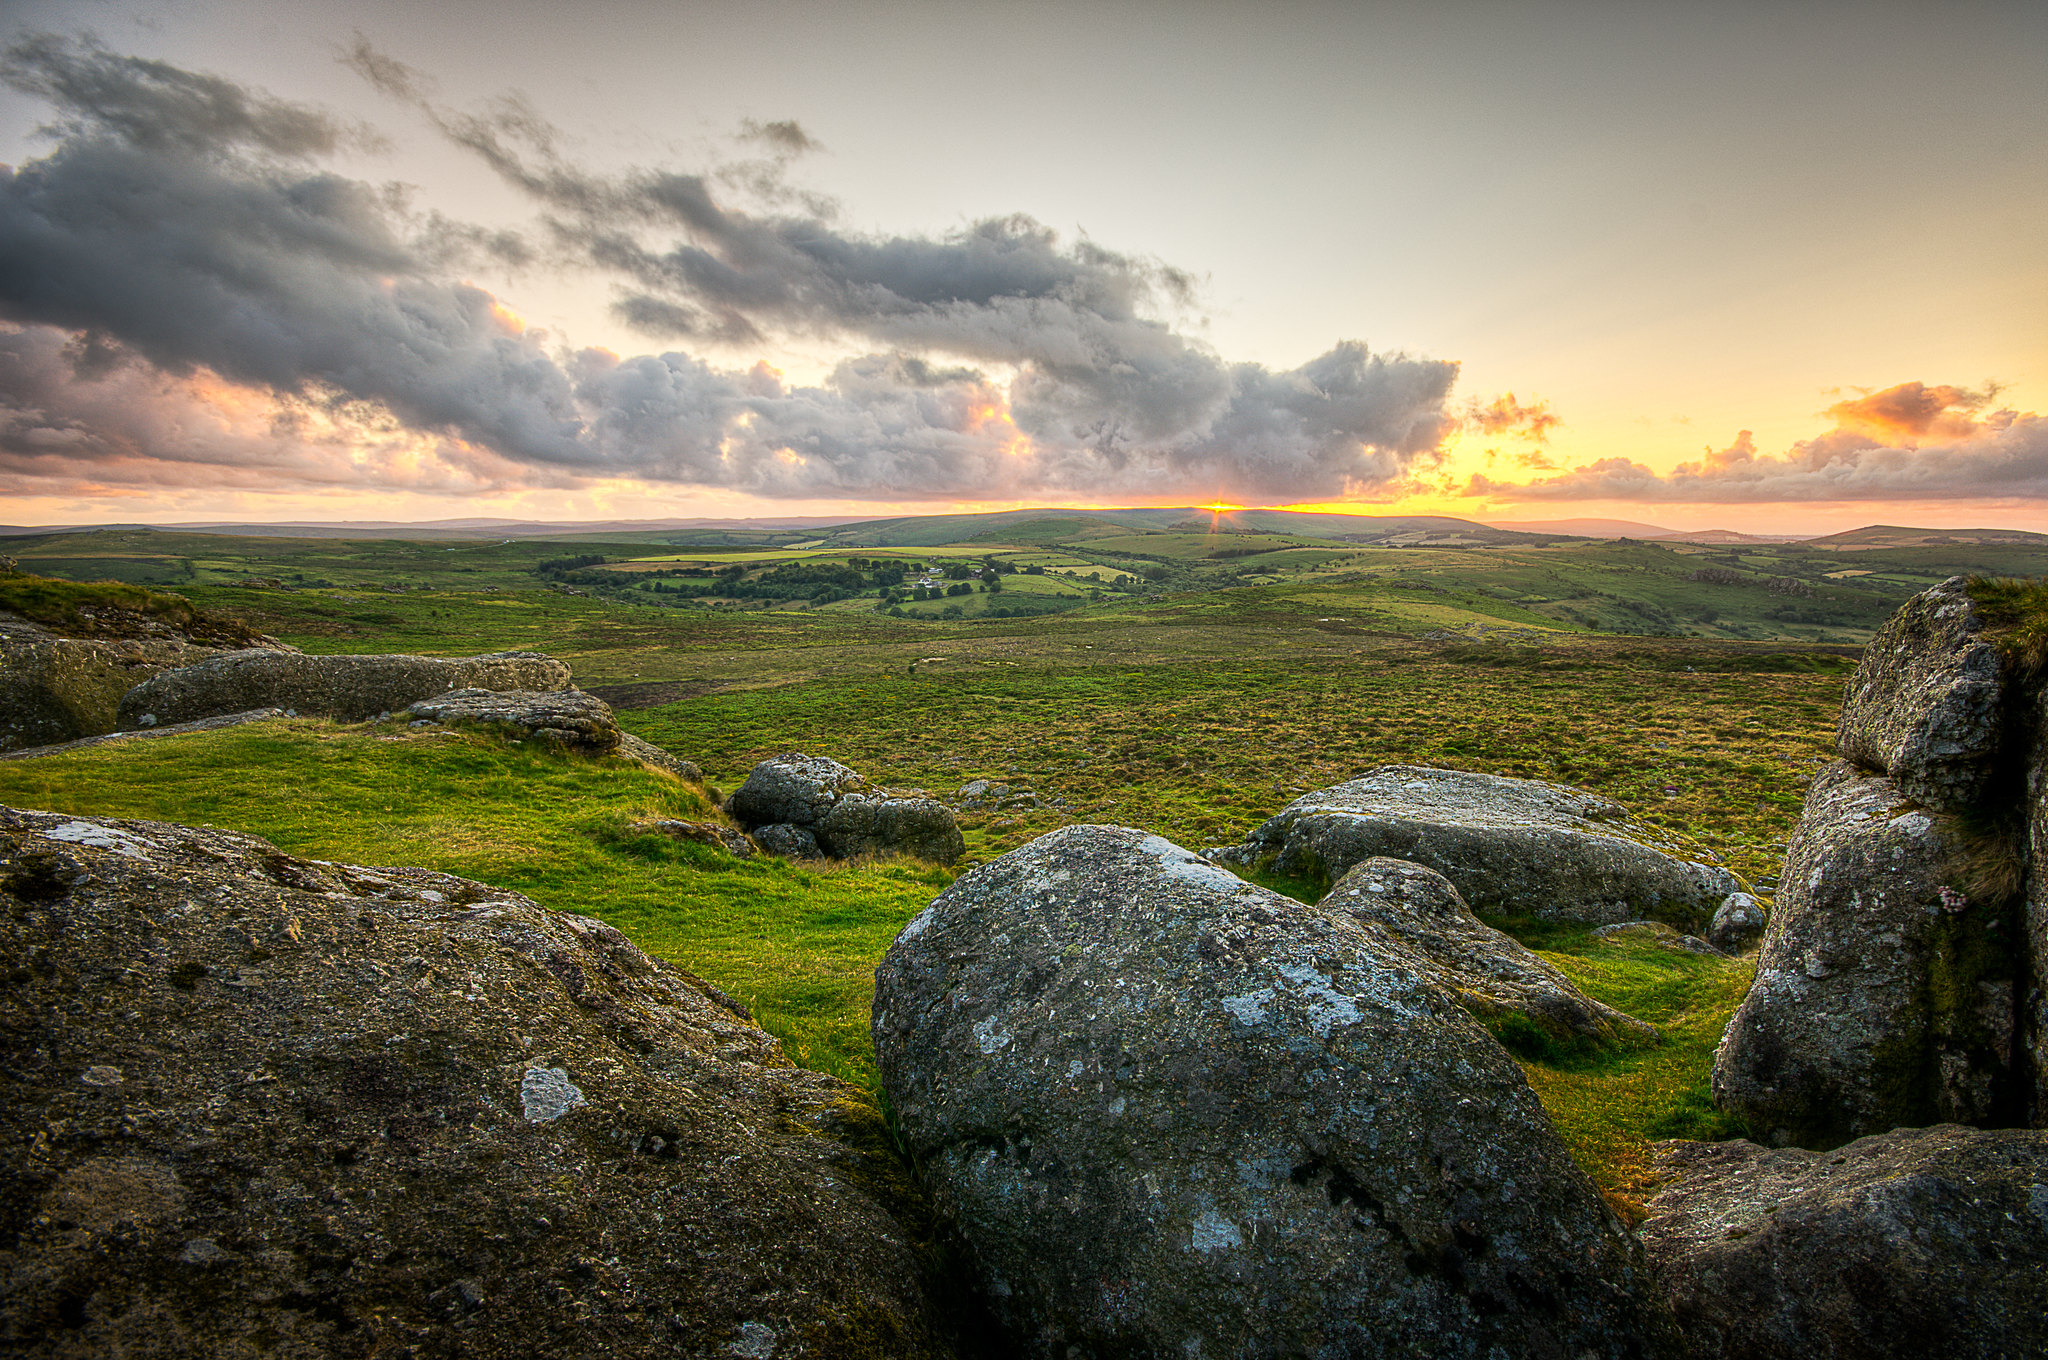 Dartmoor sunset taken from behind some rocks looking over Dartmoor's heathland with clouds in the sky and the sun setting behind them.